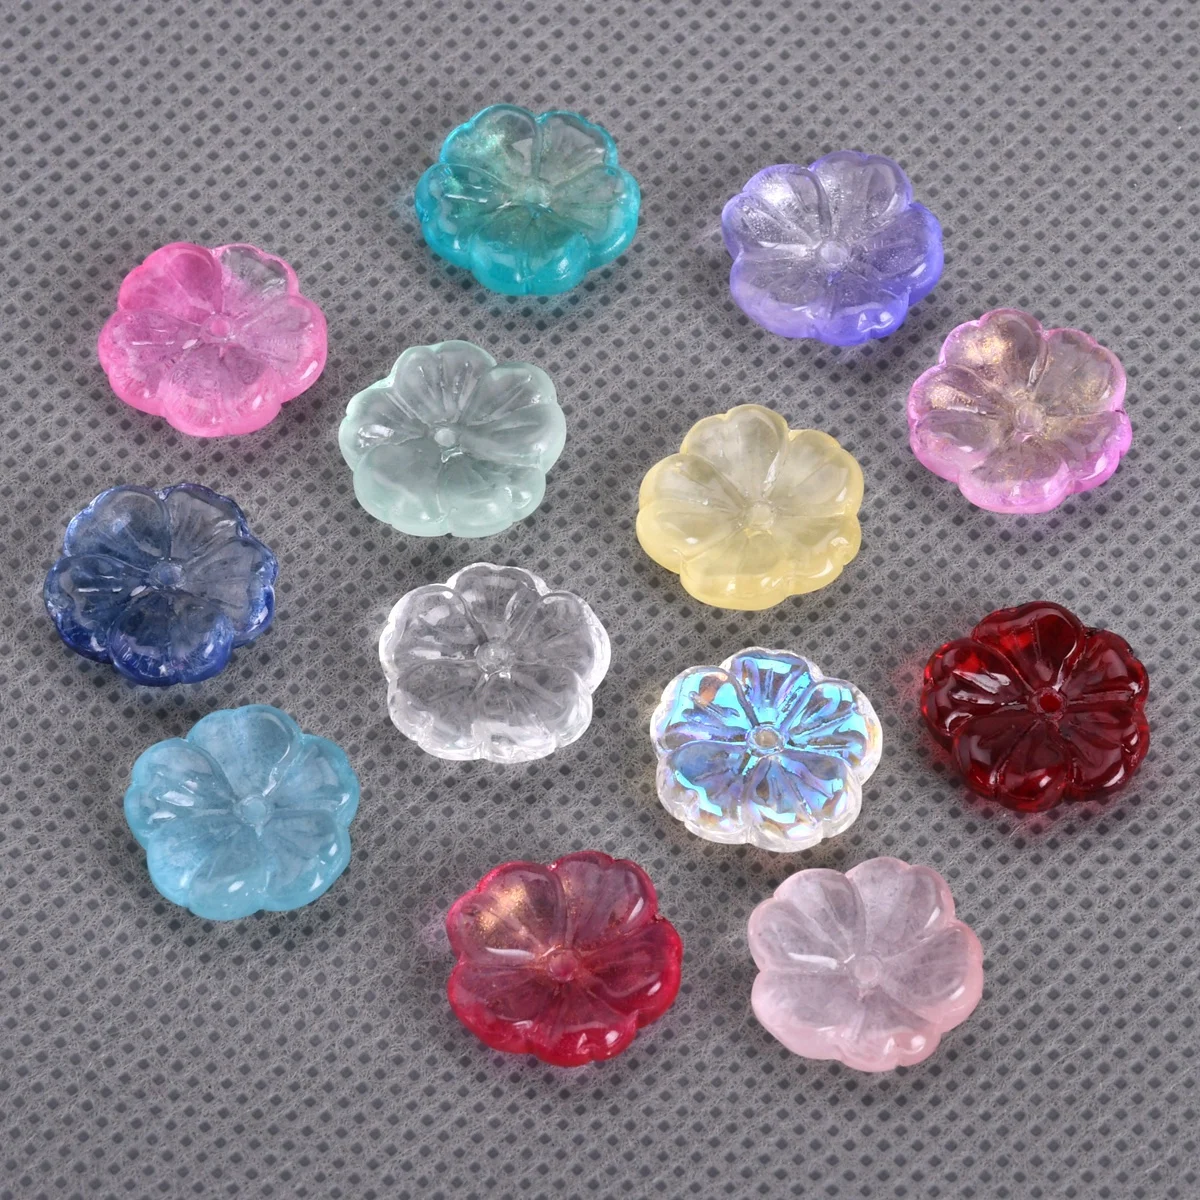 10pcs 15mm Flower Shape Handmade Lampwork Glass Loose Beads For Jewelry Making DIY Crafts Findings